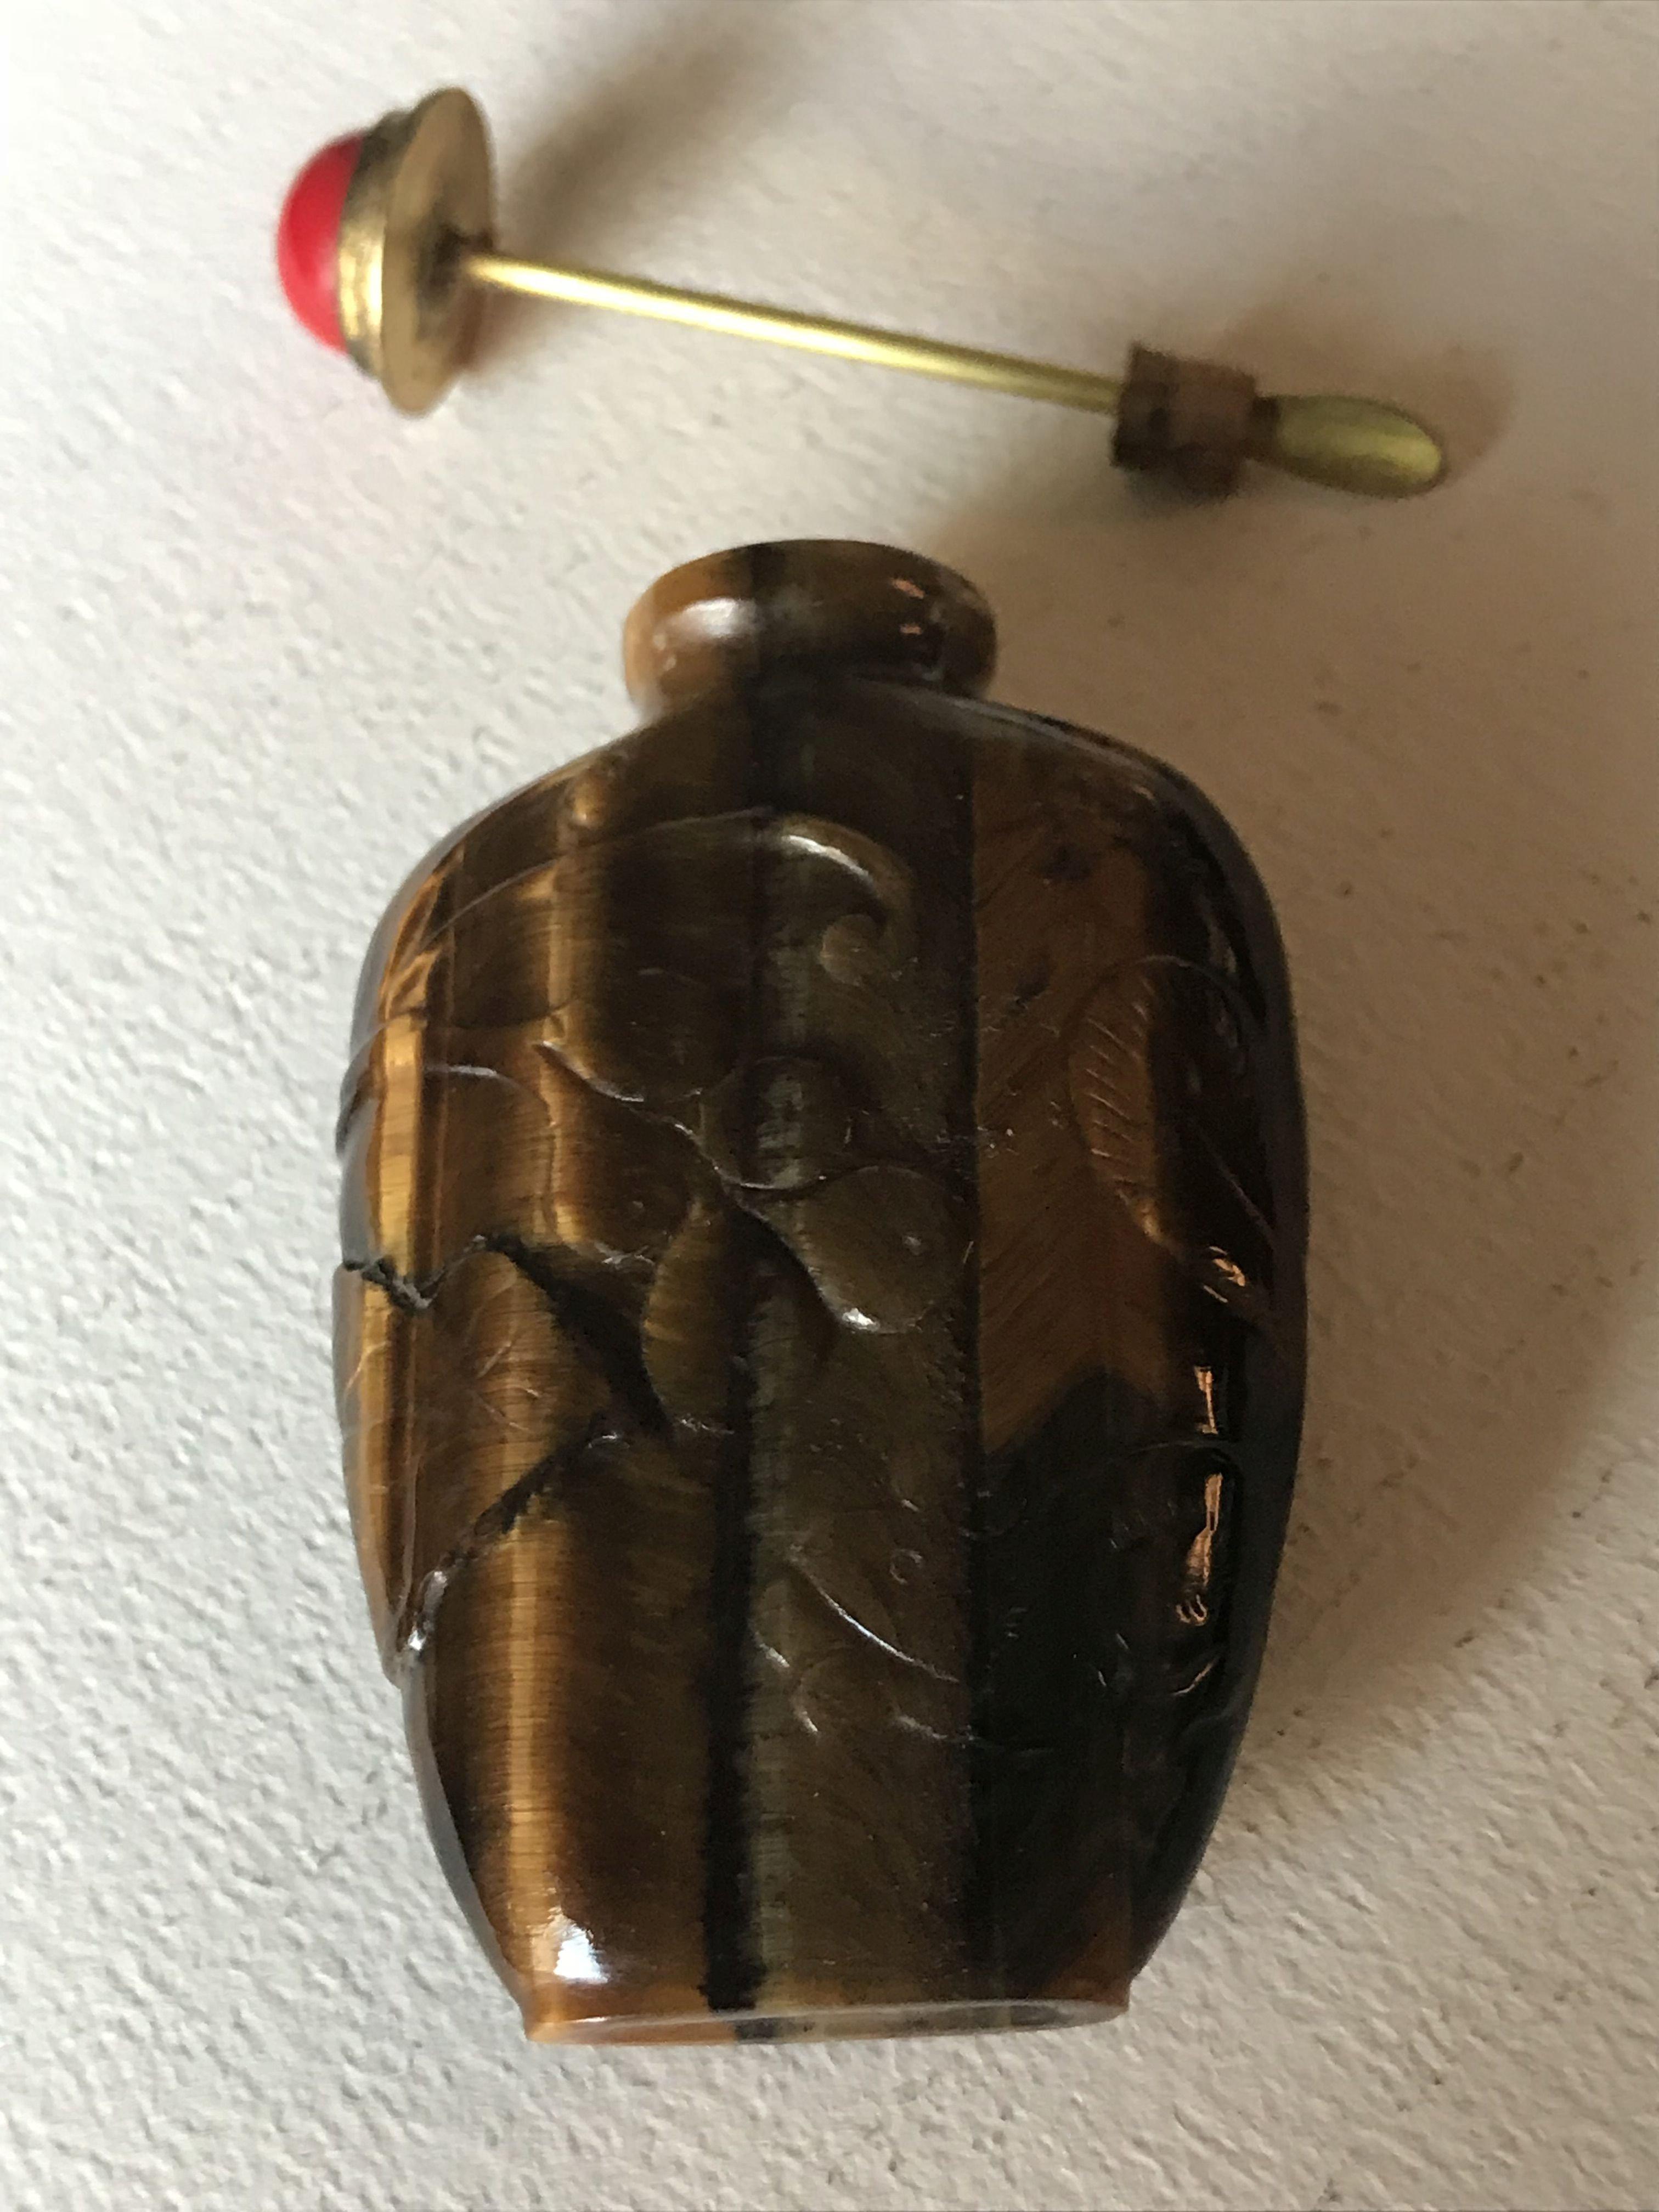 Genuine Tiger Eye gemstone sniffing bottle, hand carved with vine leaflets and grapes on the surface